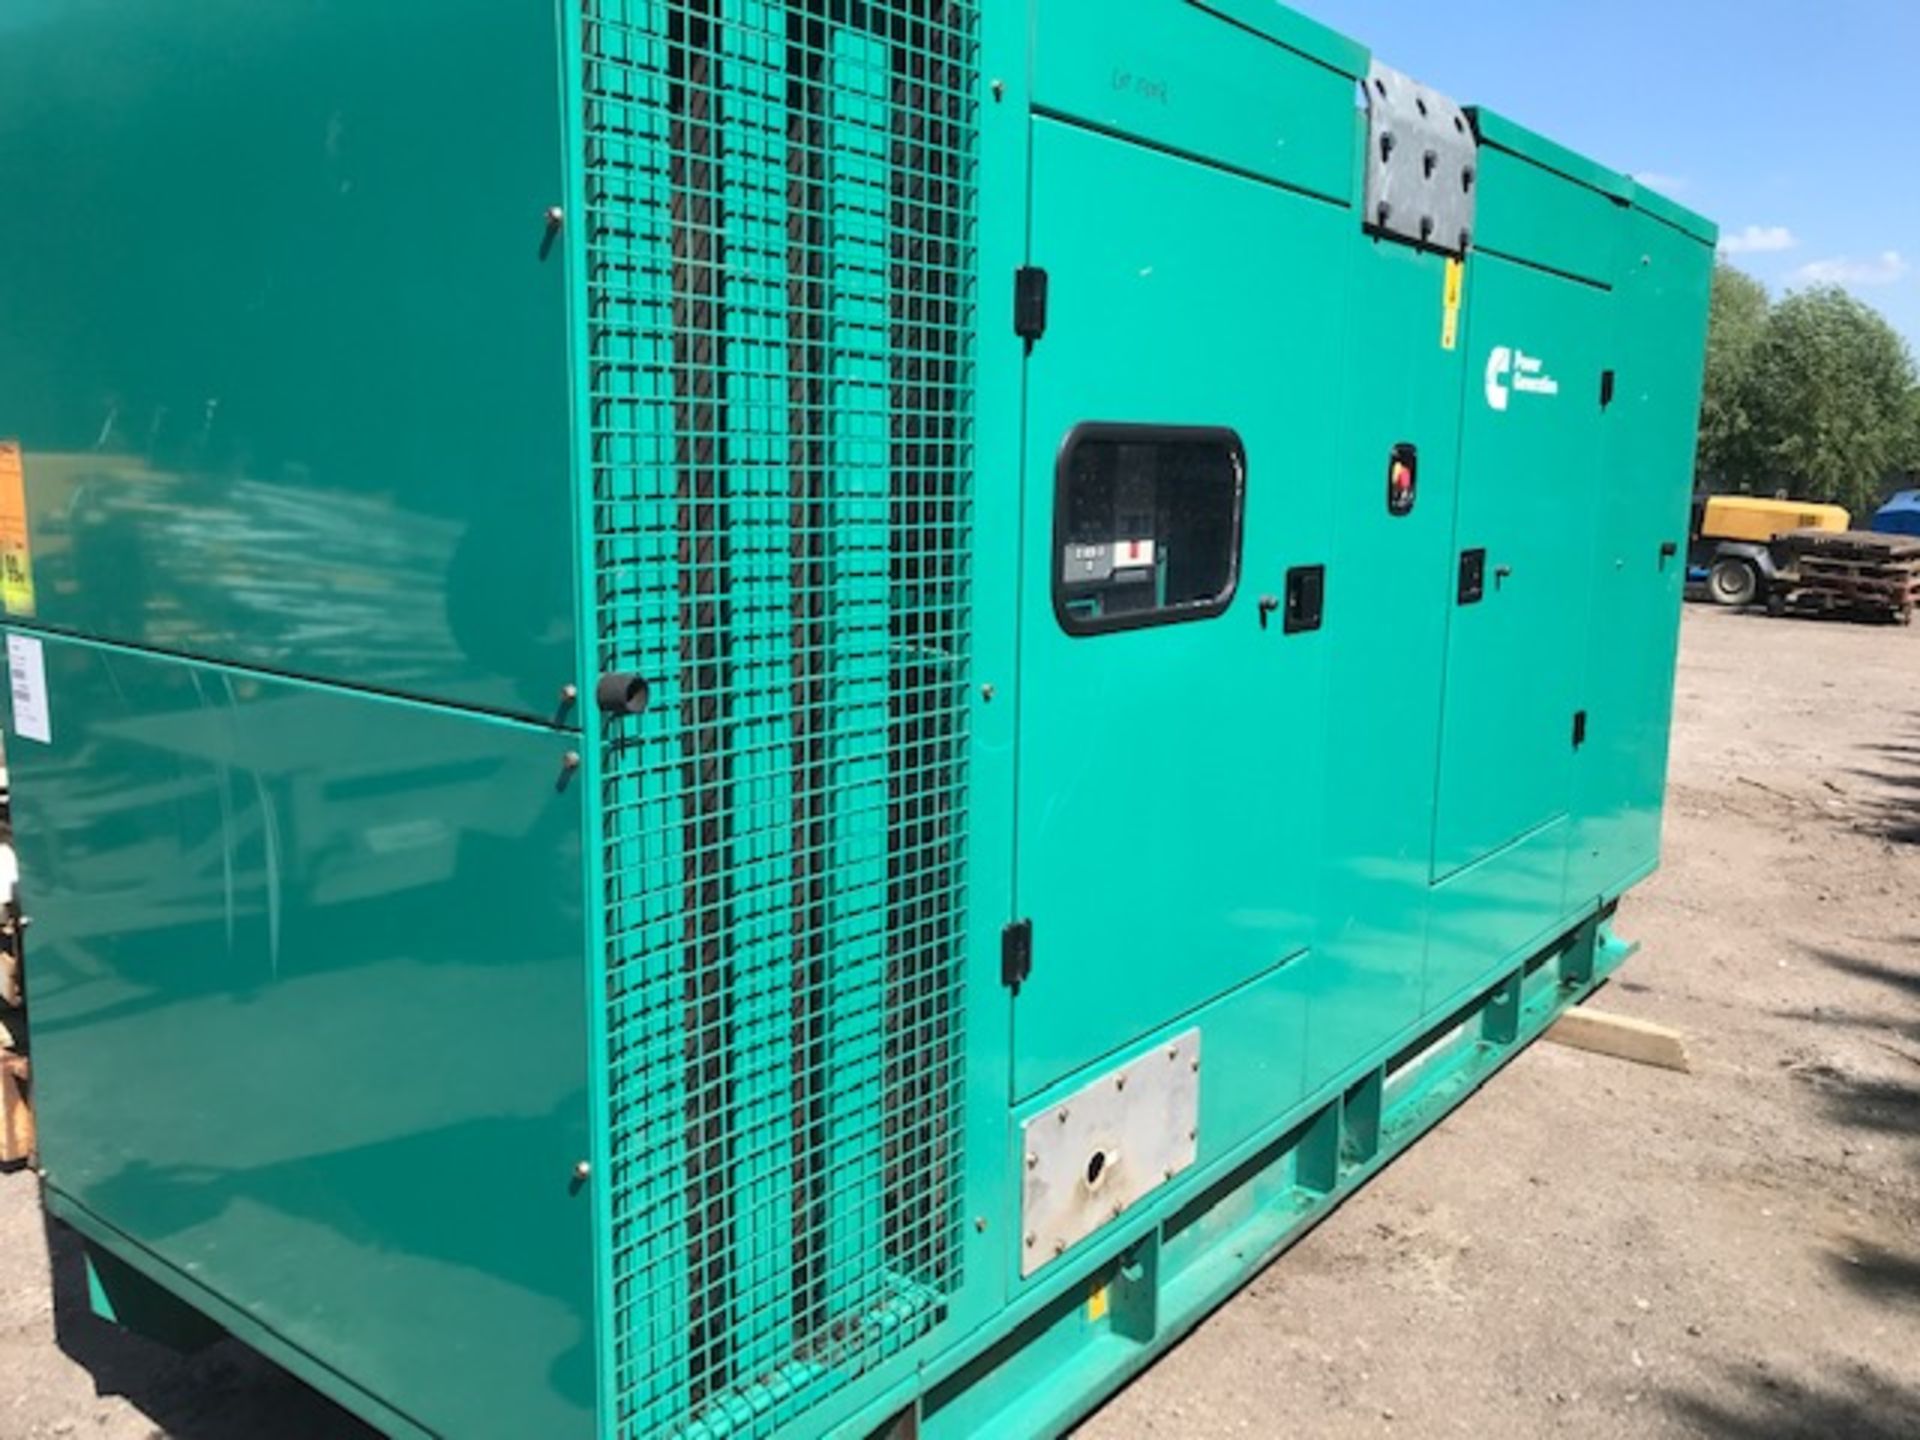 CUMMINS ENGINED 300KVA GENERATOR YEAR 2012 8367 REC HRS. DIRECT FROM LOCAL COMPANY AFTER UPGRADING - Image 5 of 14